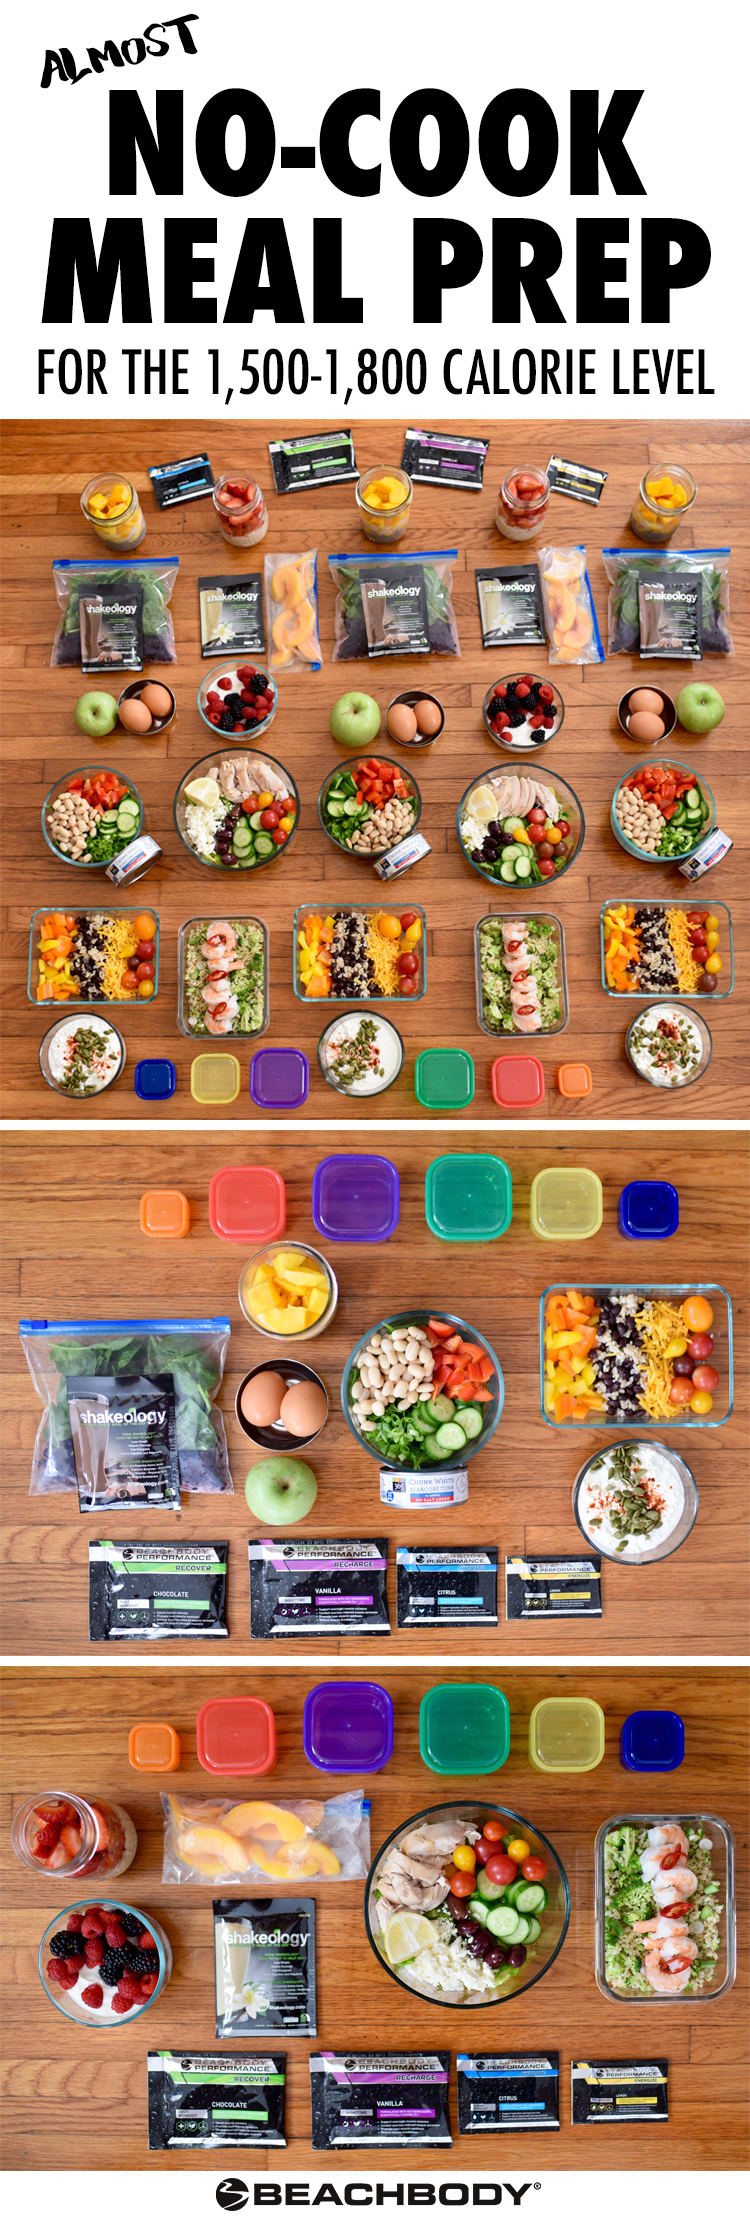 Almost No-Cook Meal Prep for the 1,500-1,800 Calorie Level #mealplanning #mealprep #healthyeating